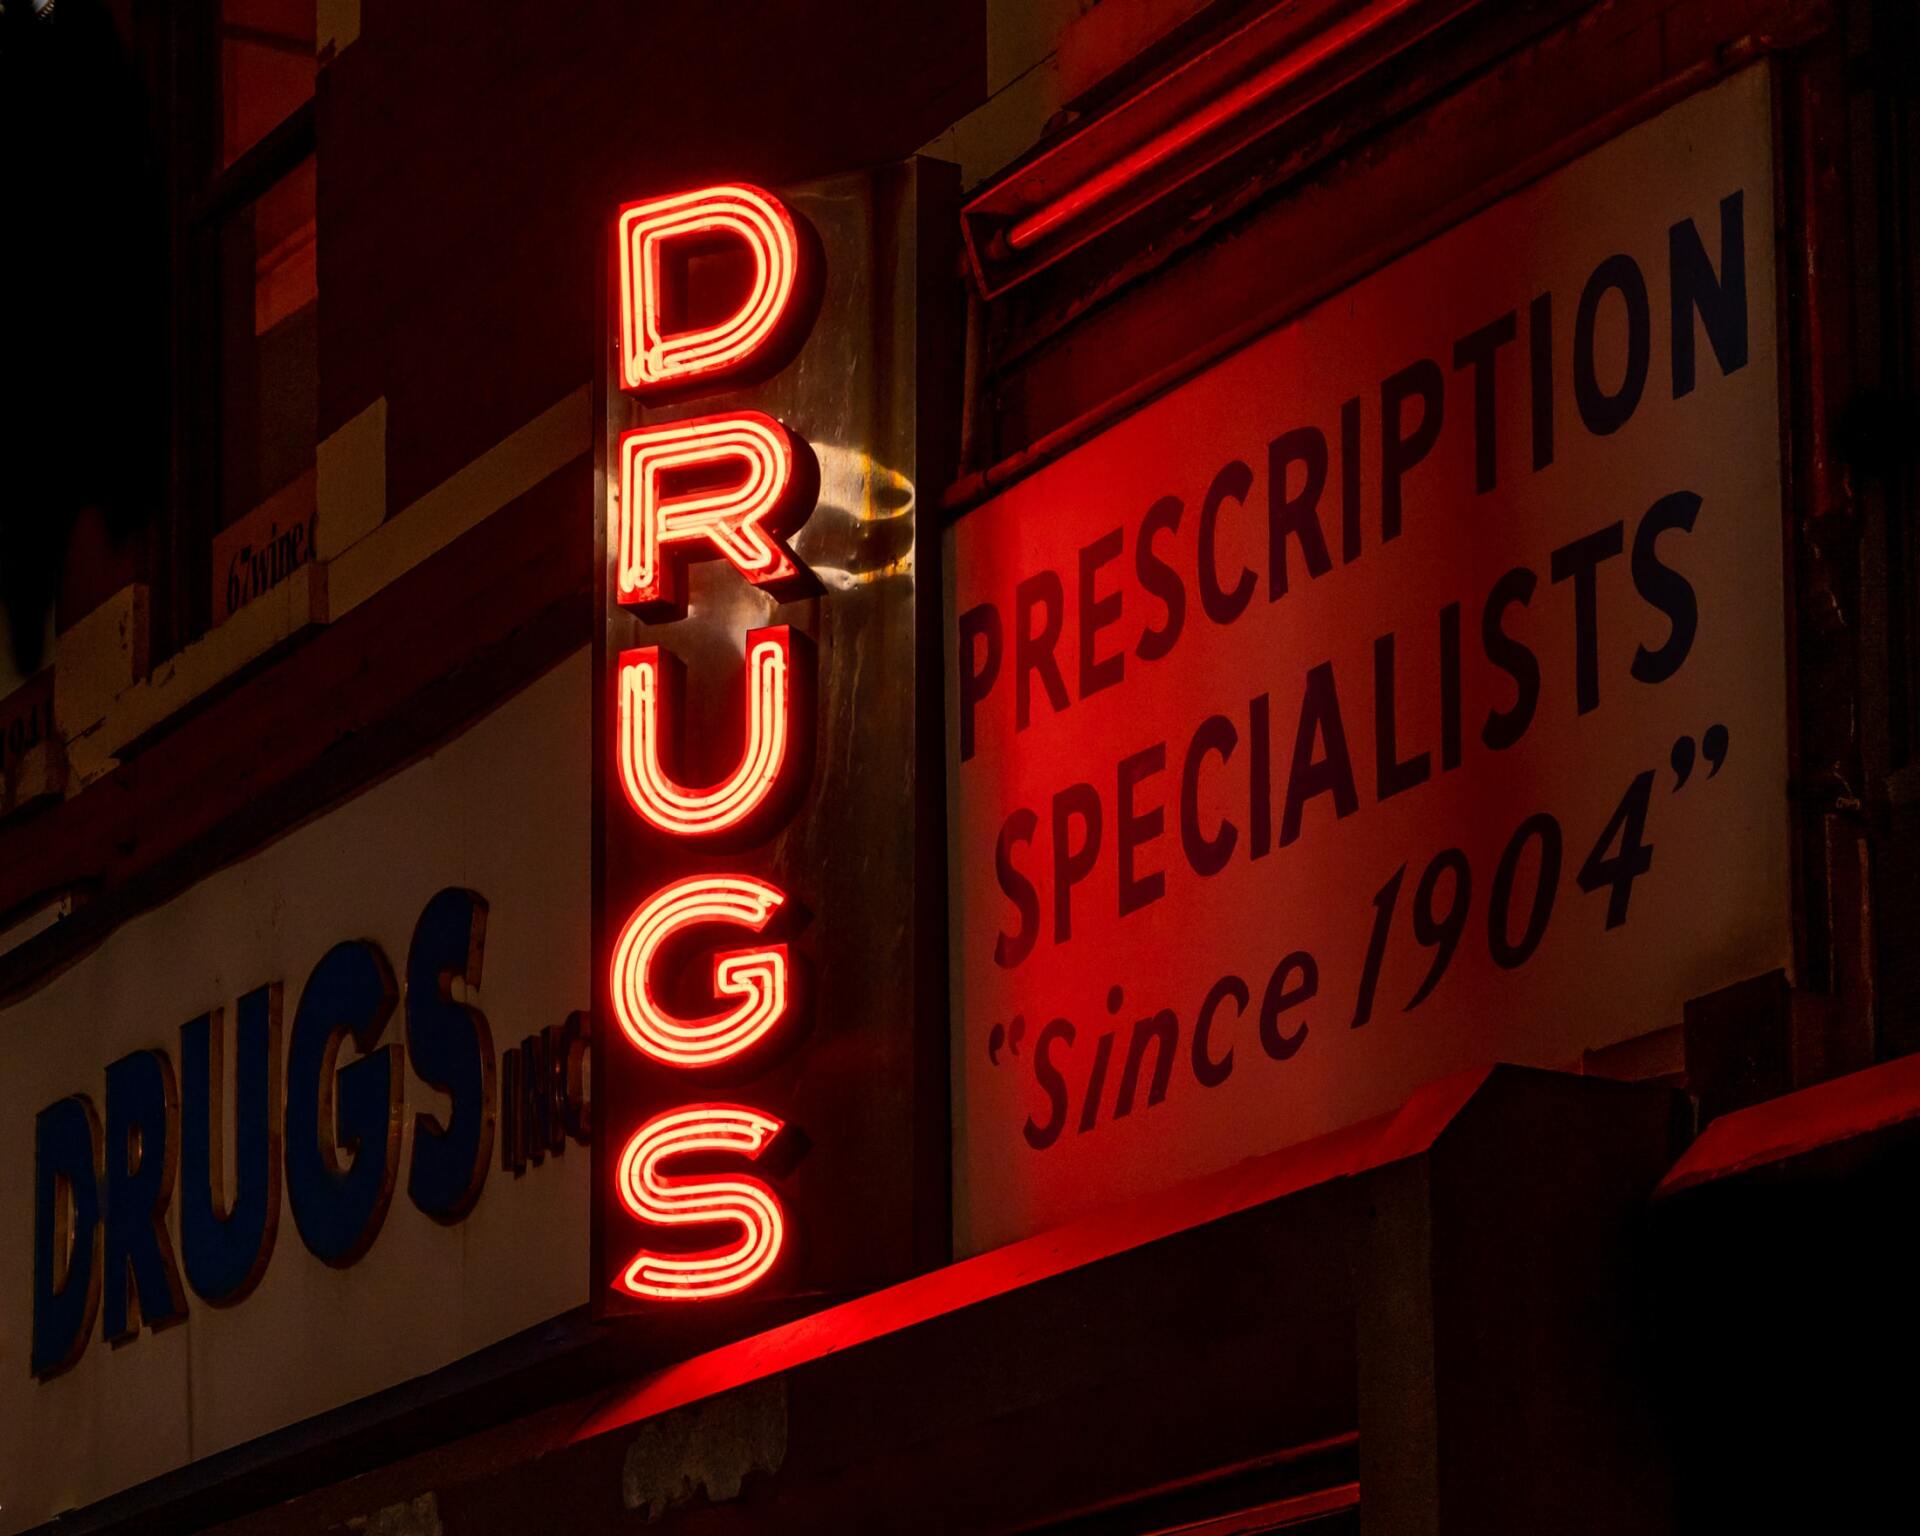 Drugstore in Wetumpka, AL, a client of a criminal defense lawyer might frequent